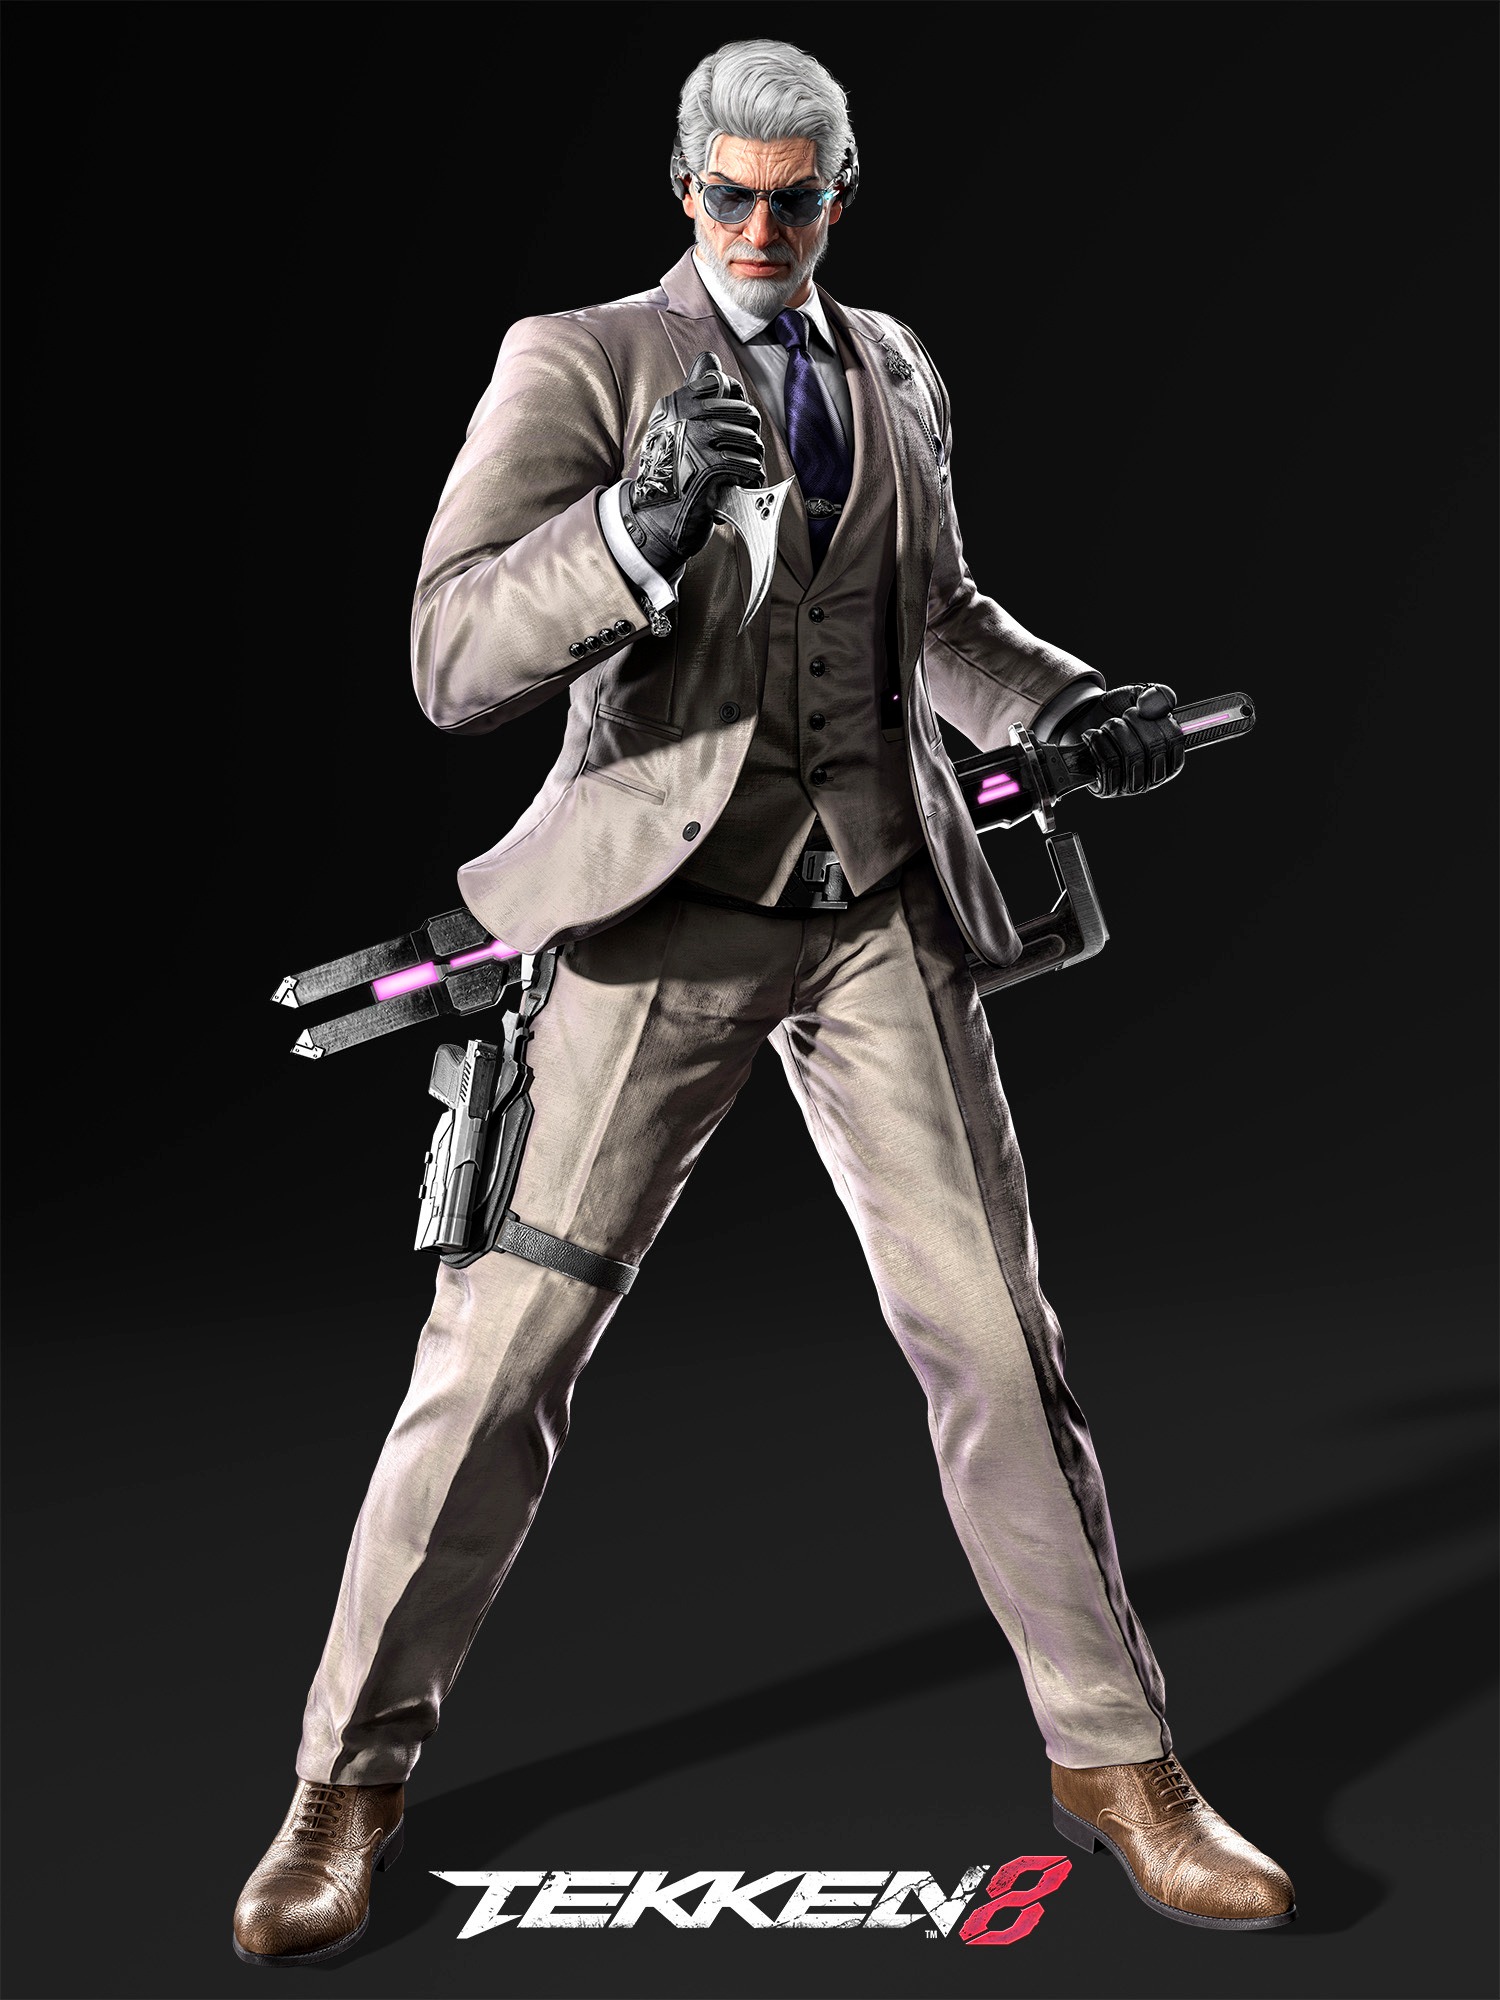 Official character render of Victor